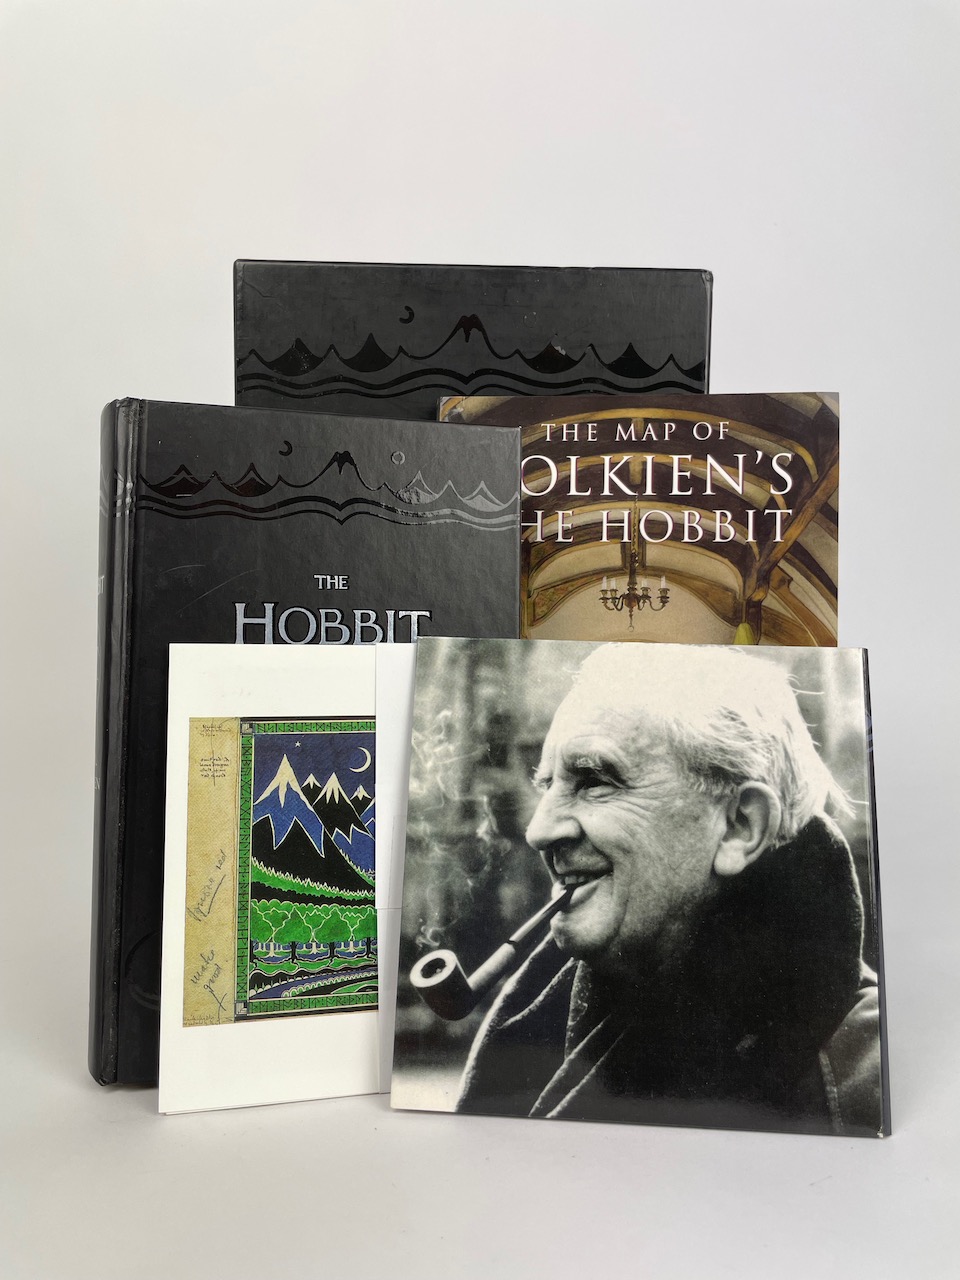 
The Hobbit, Limited Edition Collectors' Box 9